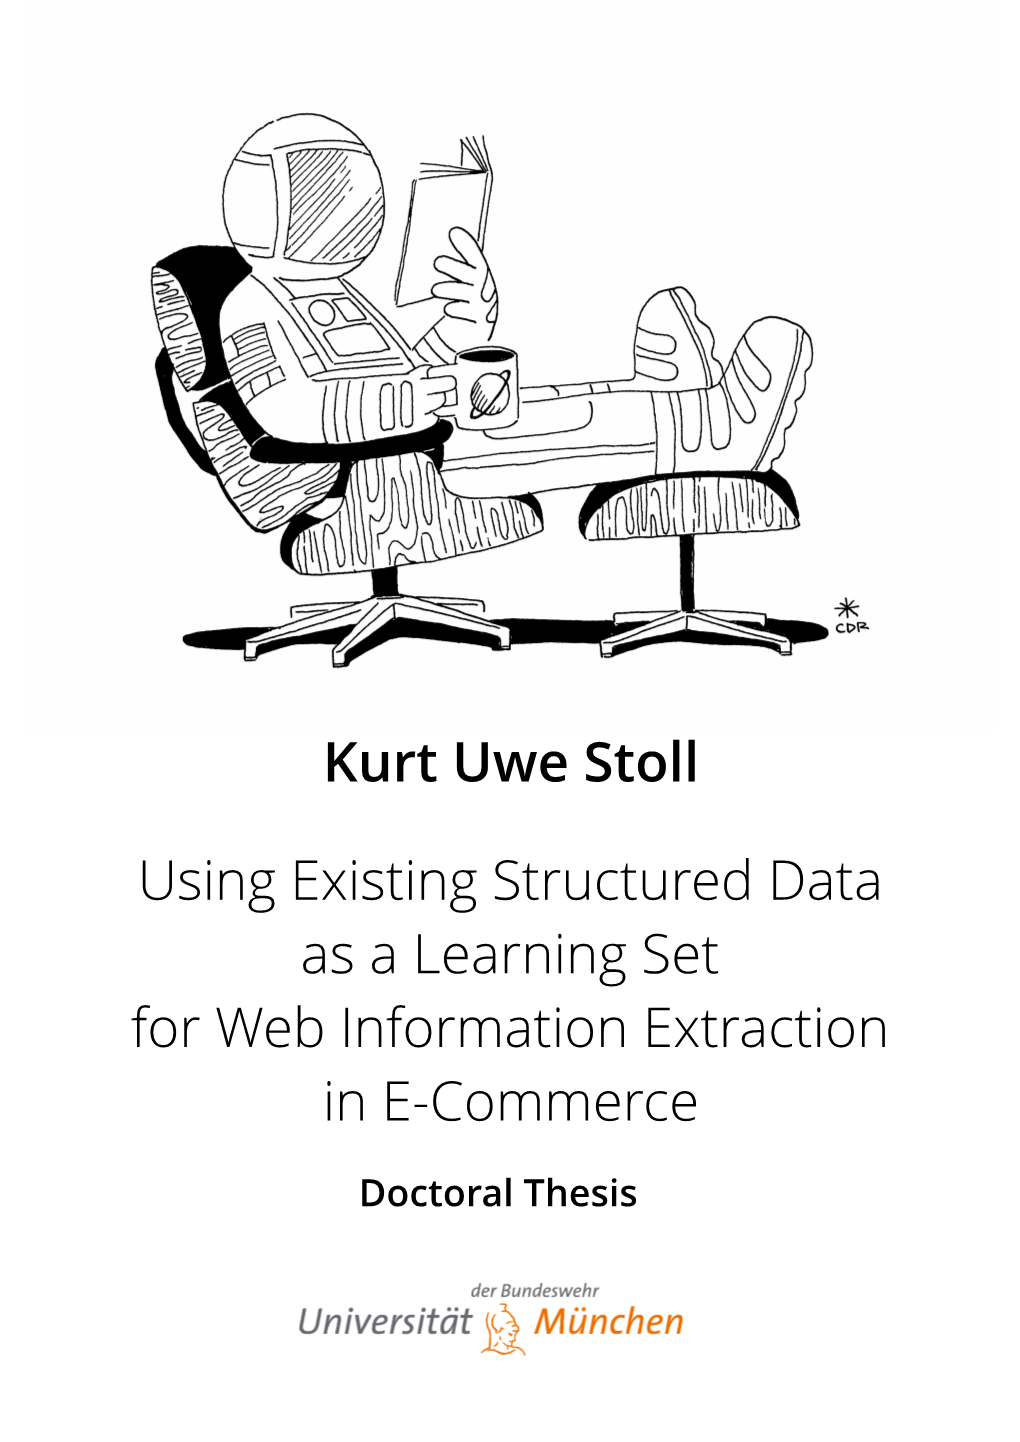 Kurt Uwe Stoll Using Existing Structured Data As a Learning Set